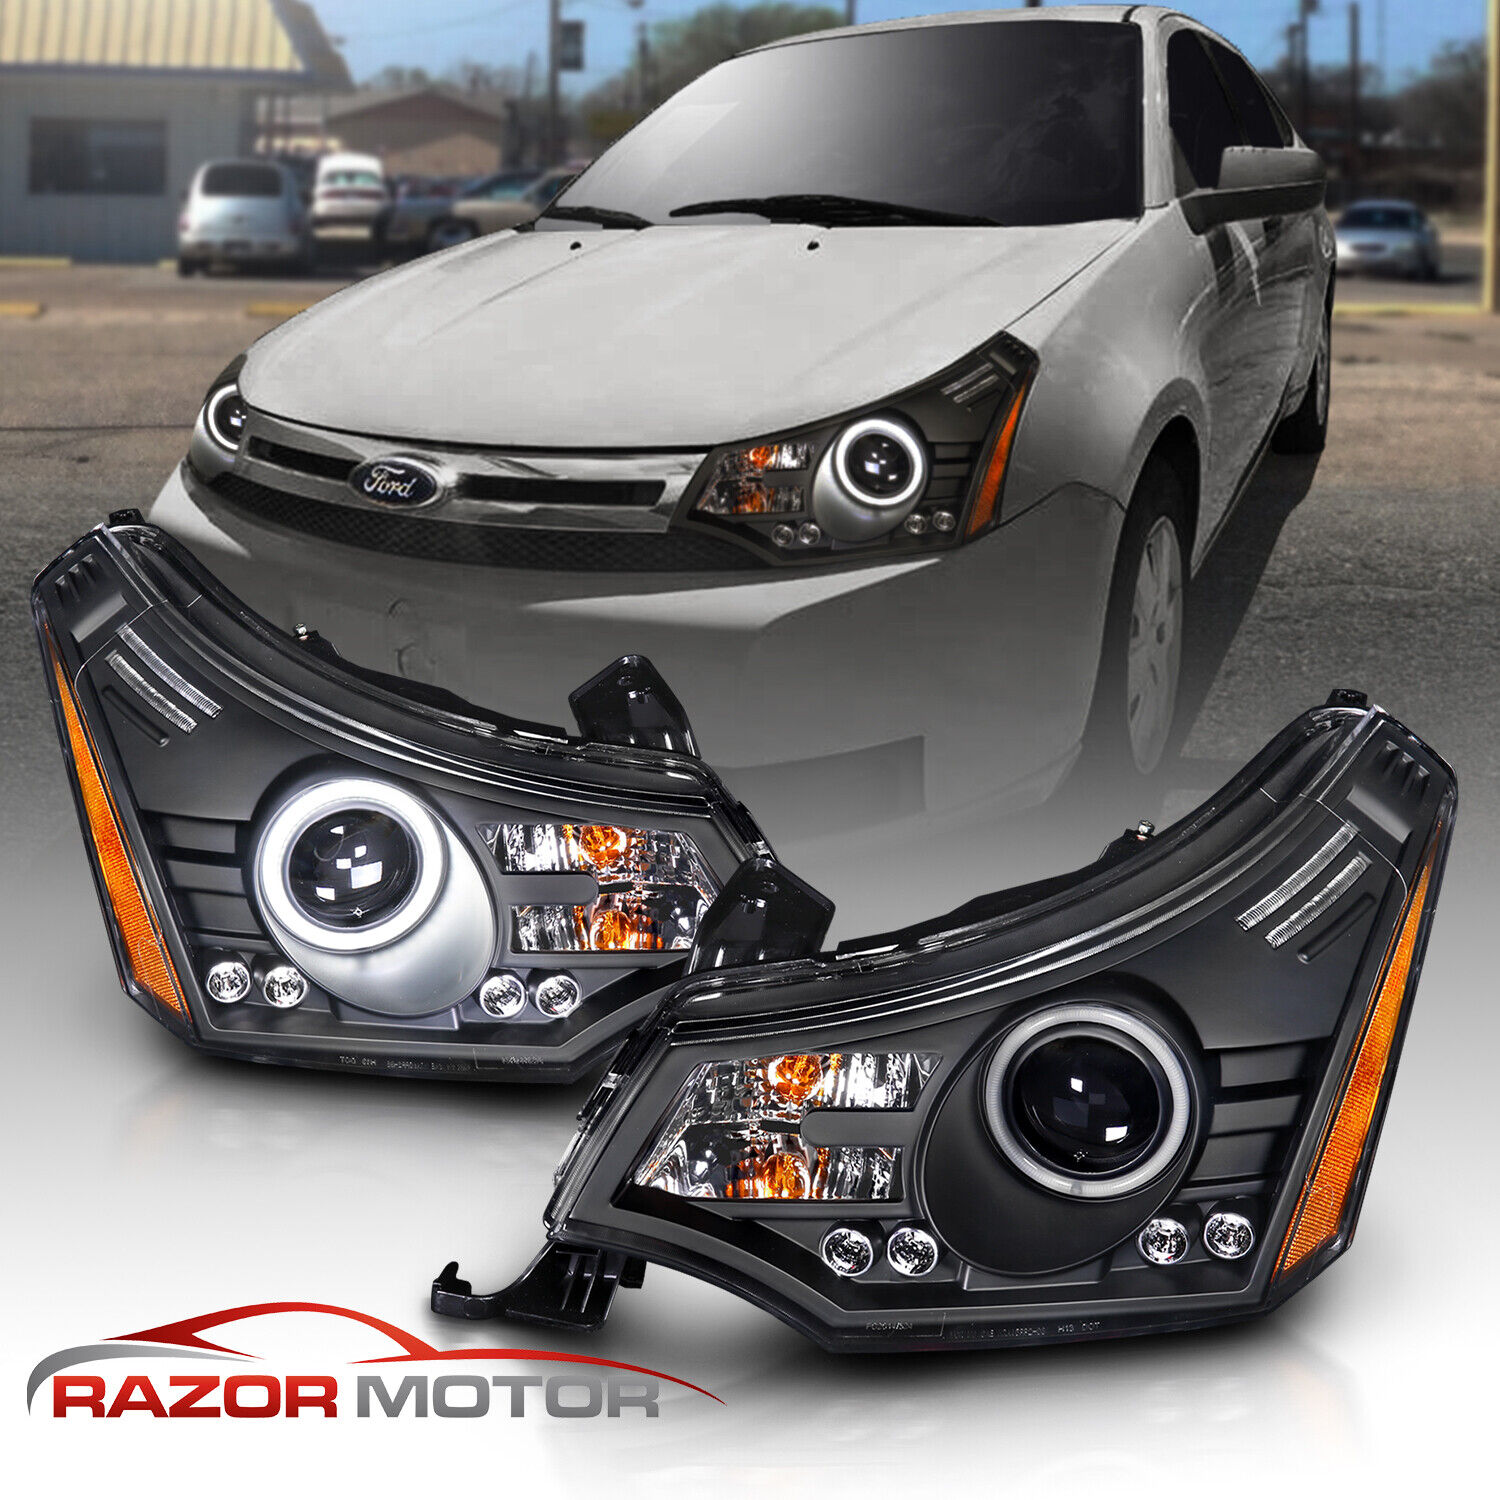 2008-2011 Black LED + LED Halo Projector Headlight For Ford Focus Coupe / Sedan